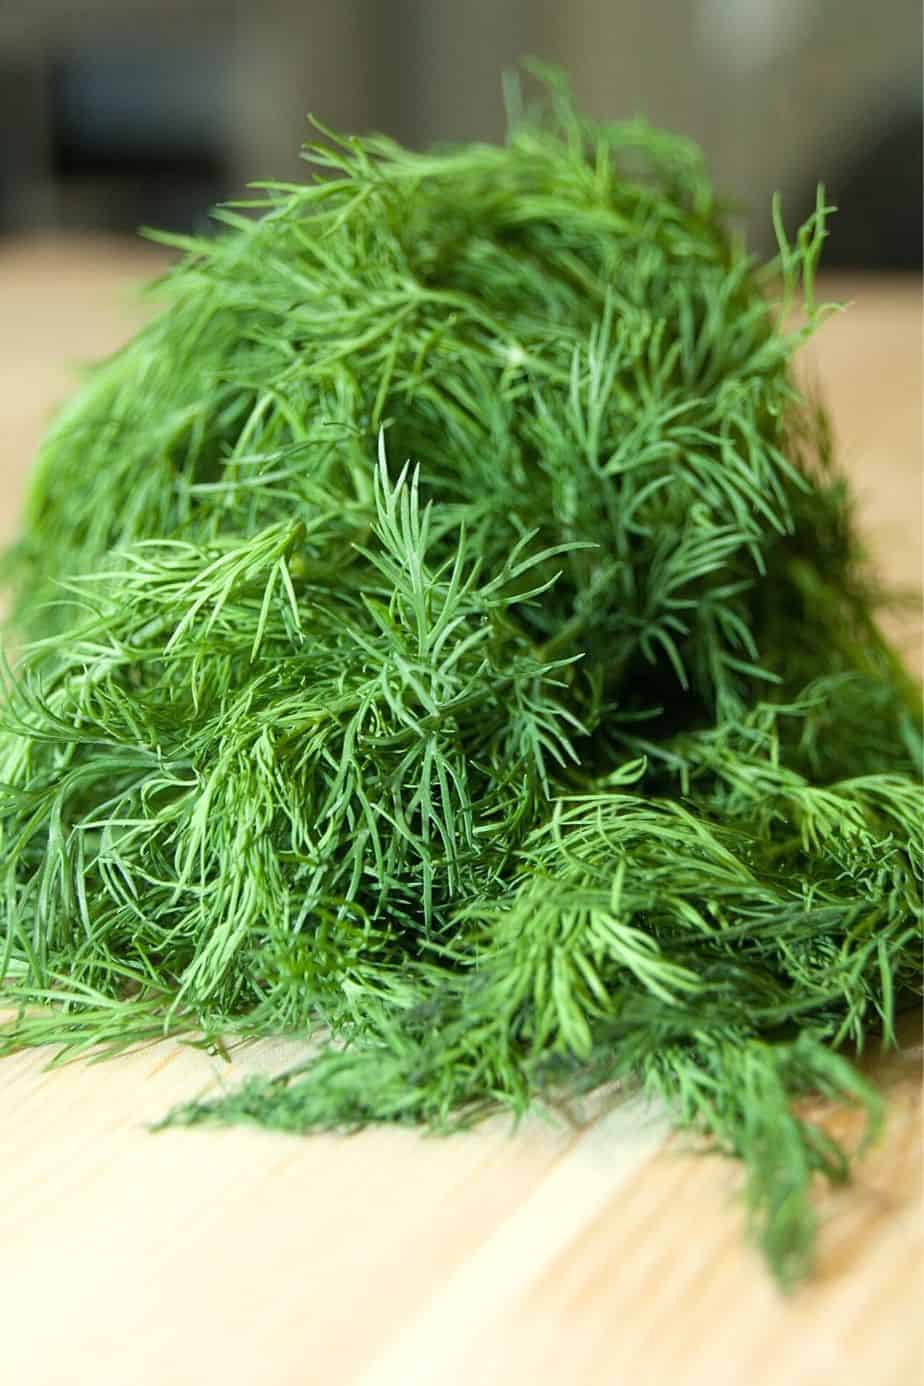 Dill, part of the Celery plant family, can be grown on a south-facing balcony